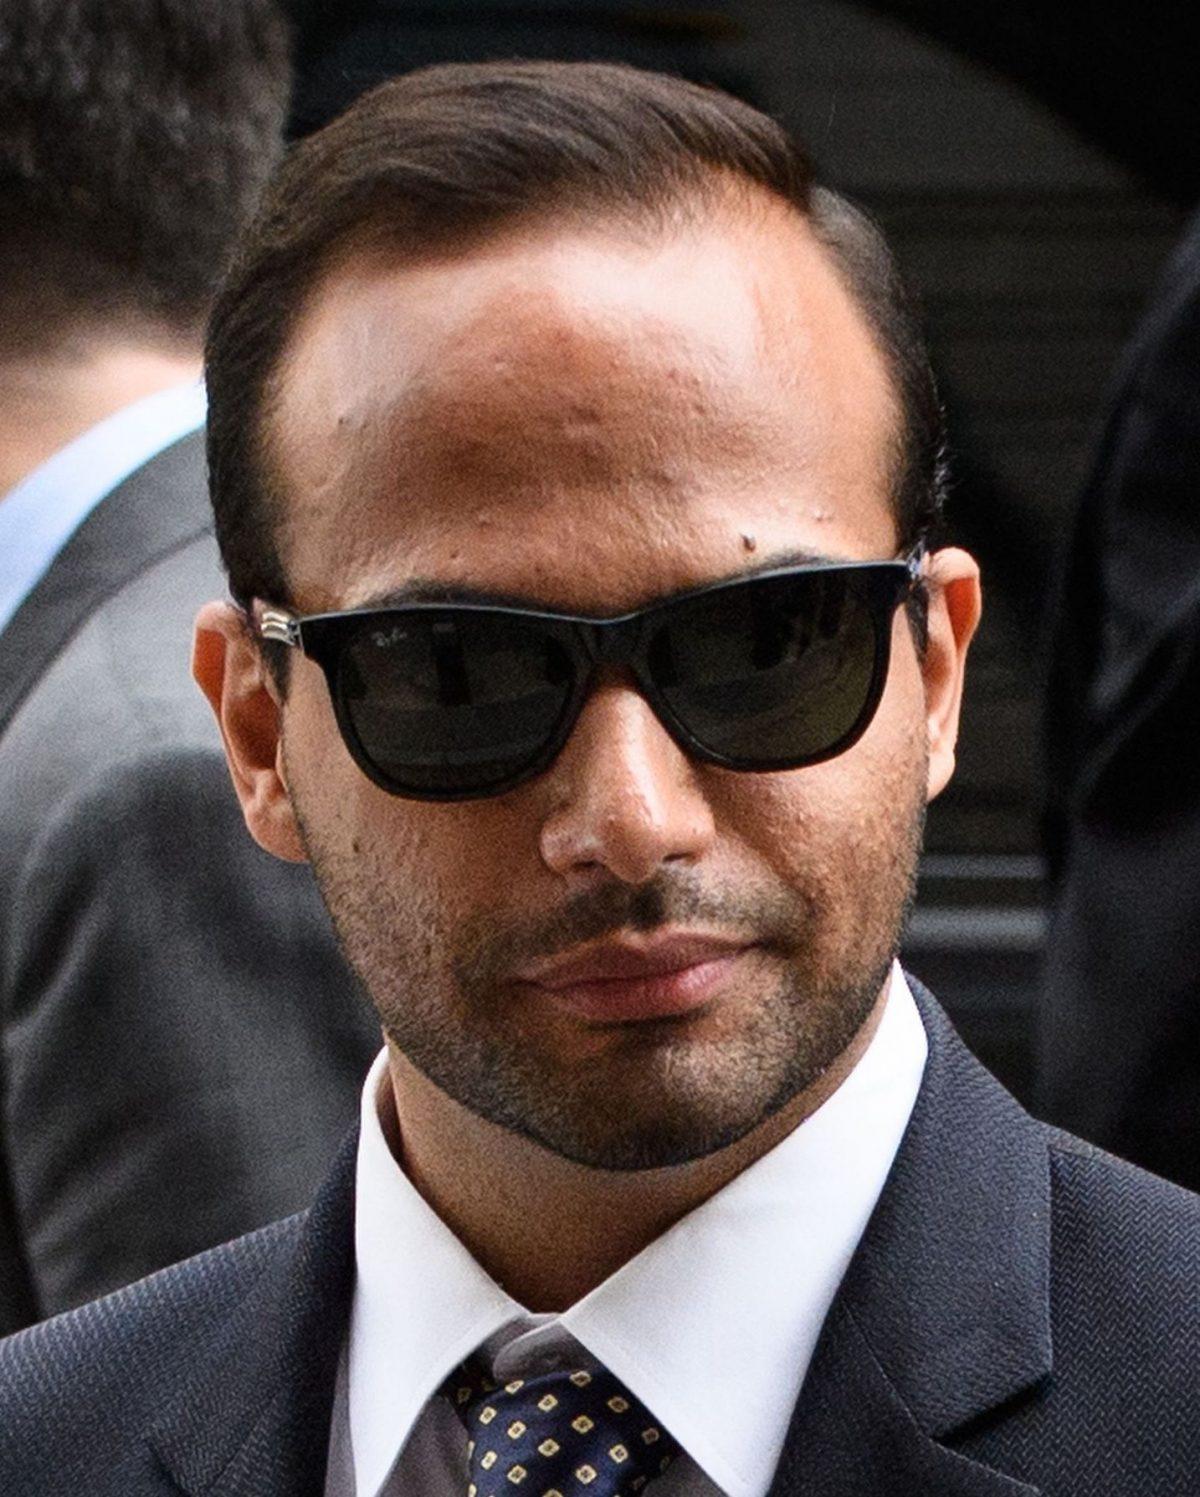 Former foreign policy adviser to the Trump campaign George Papadopoulos. (MANDEL NGAN/AFP/Getty Images)